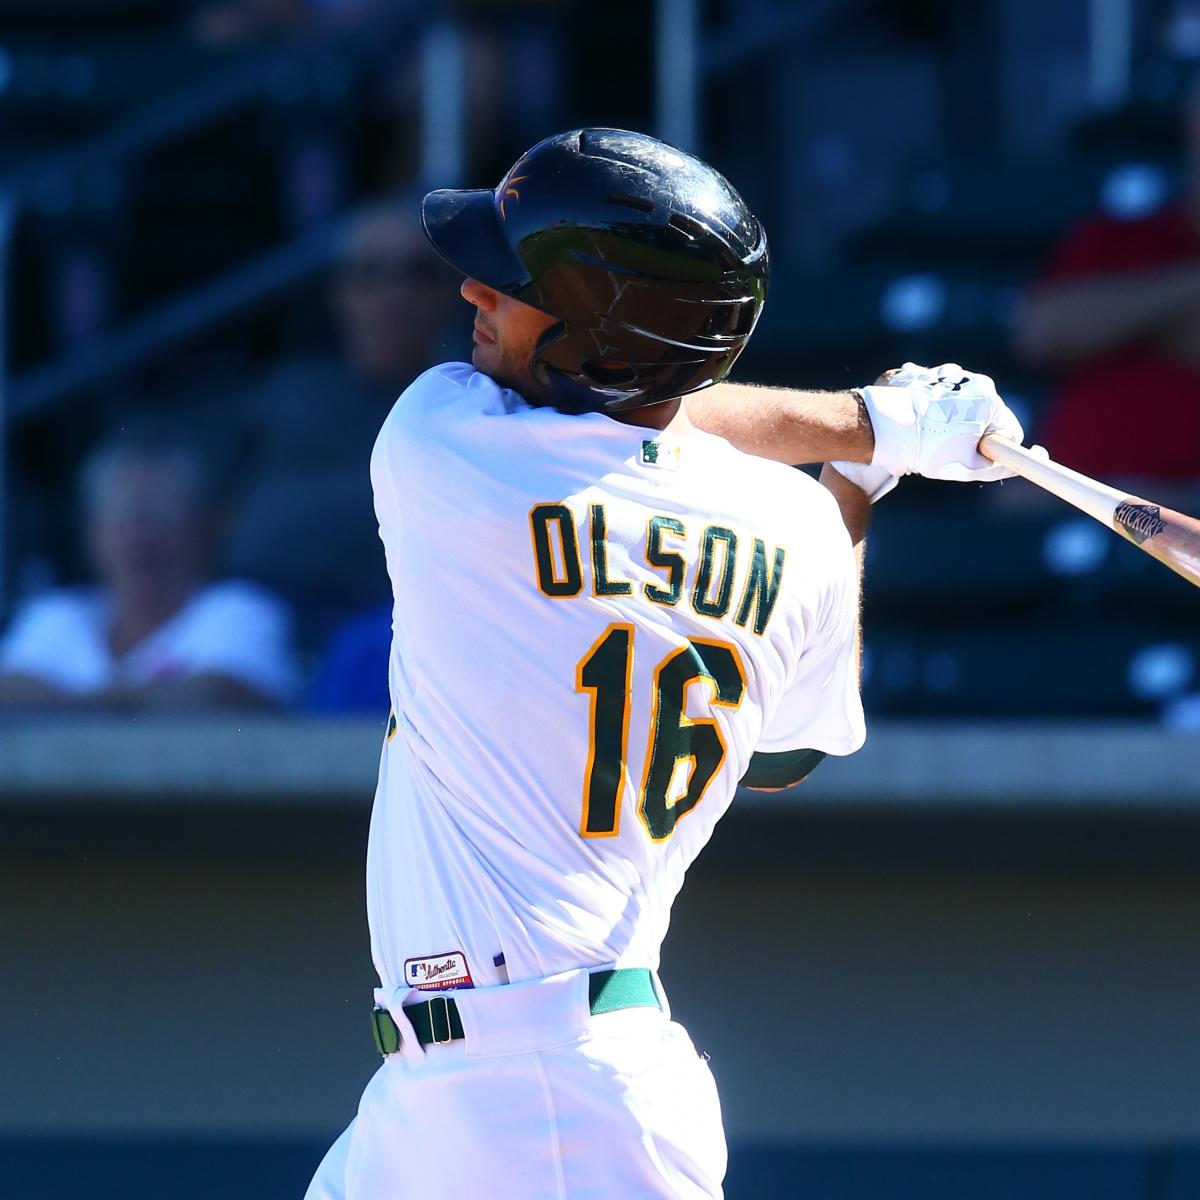 Scouting reports: Four new Oakland A's prospects from Matt Olson